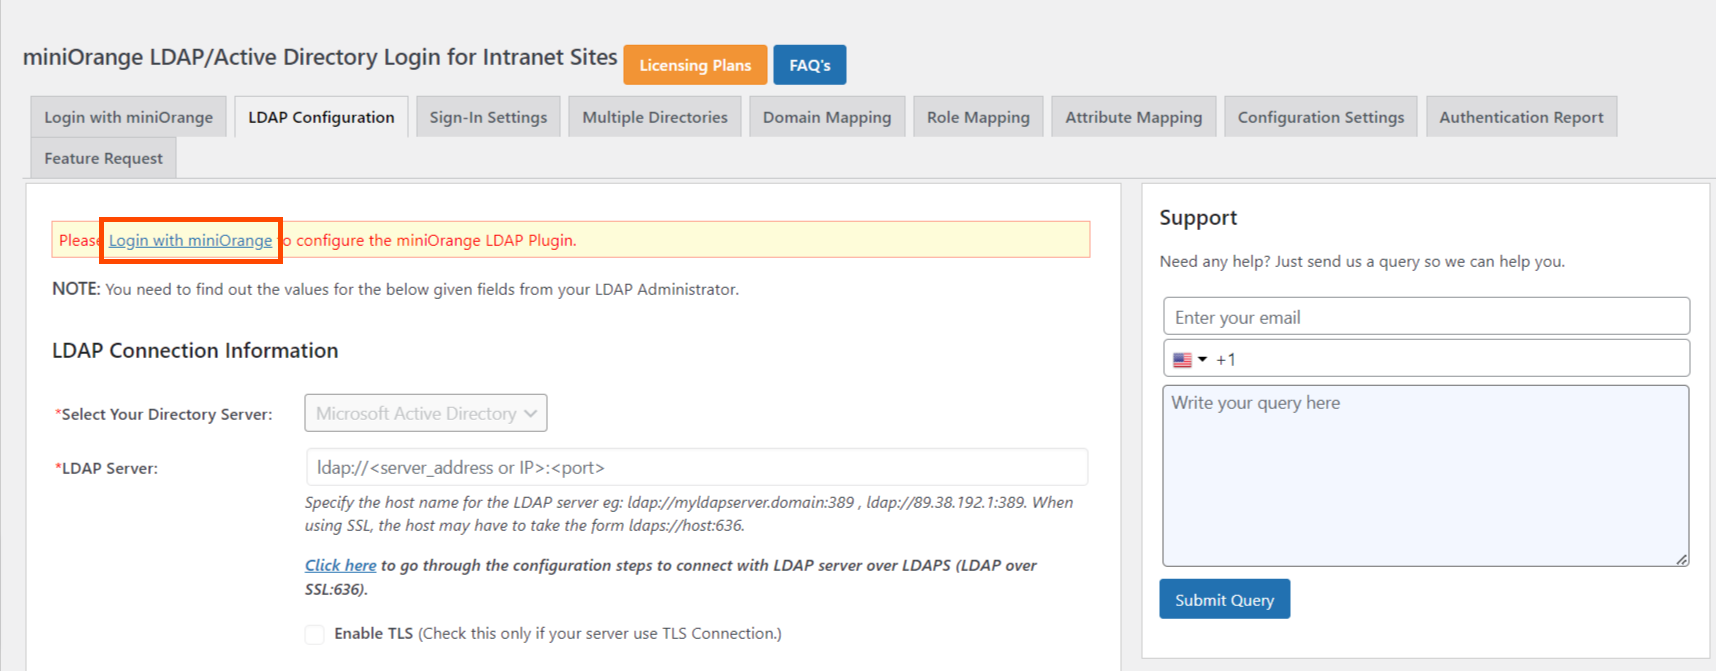 LDAP/Active Directory login for intranet sites multiple Directory plugin login with miniorange account.